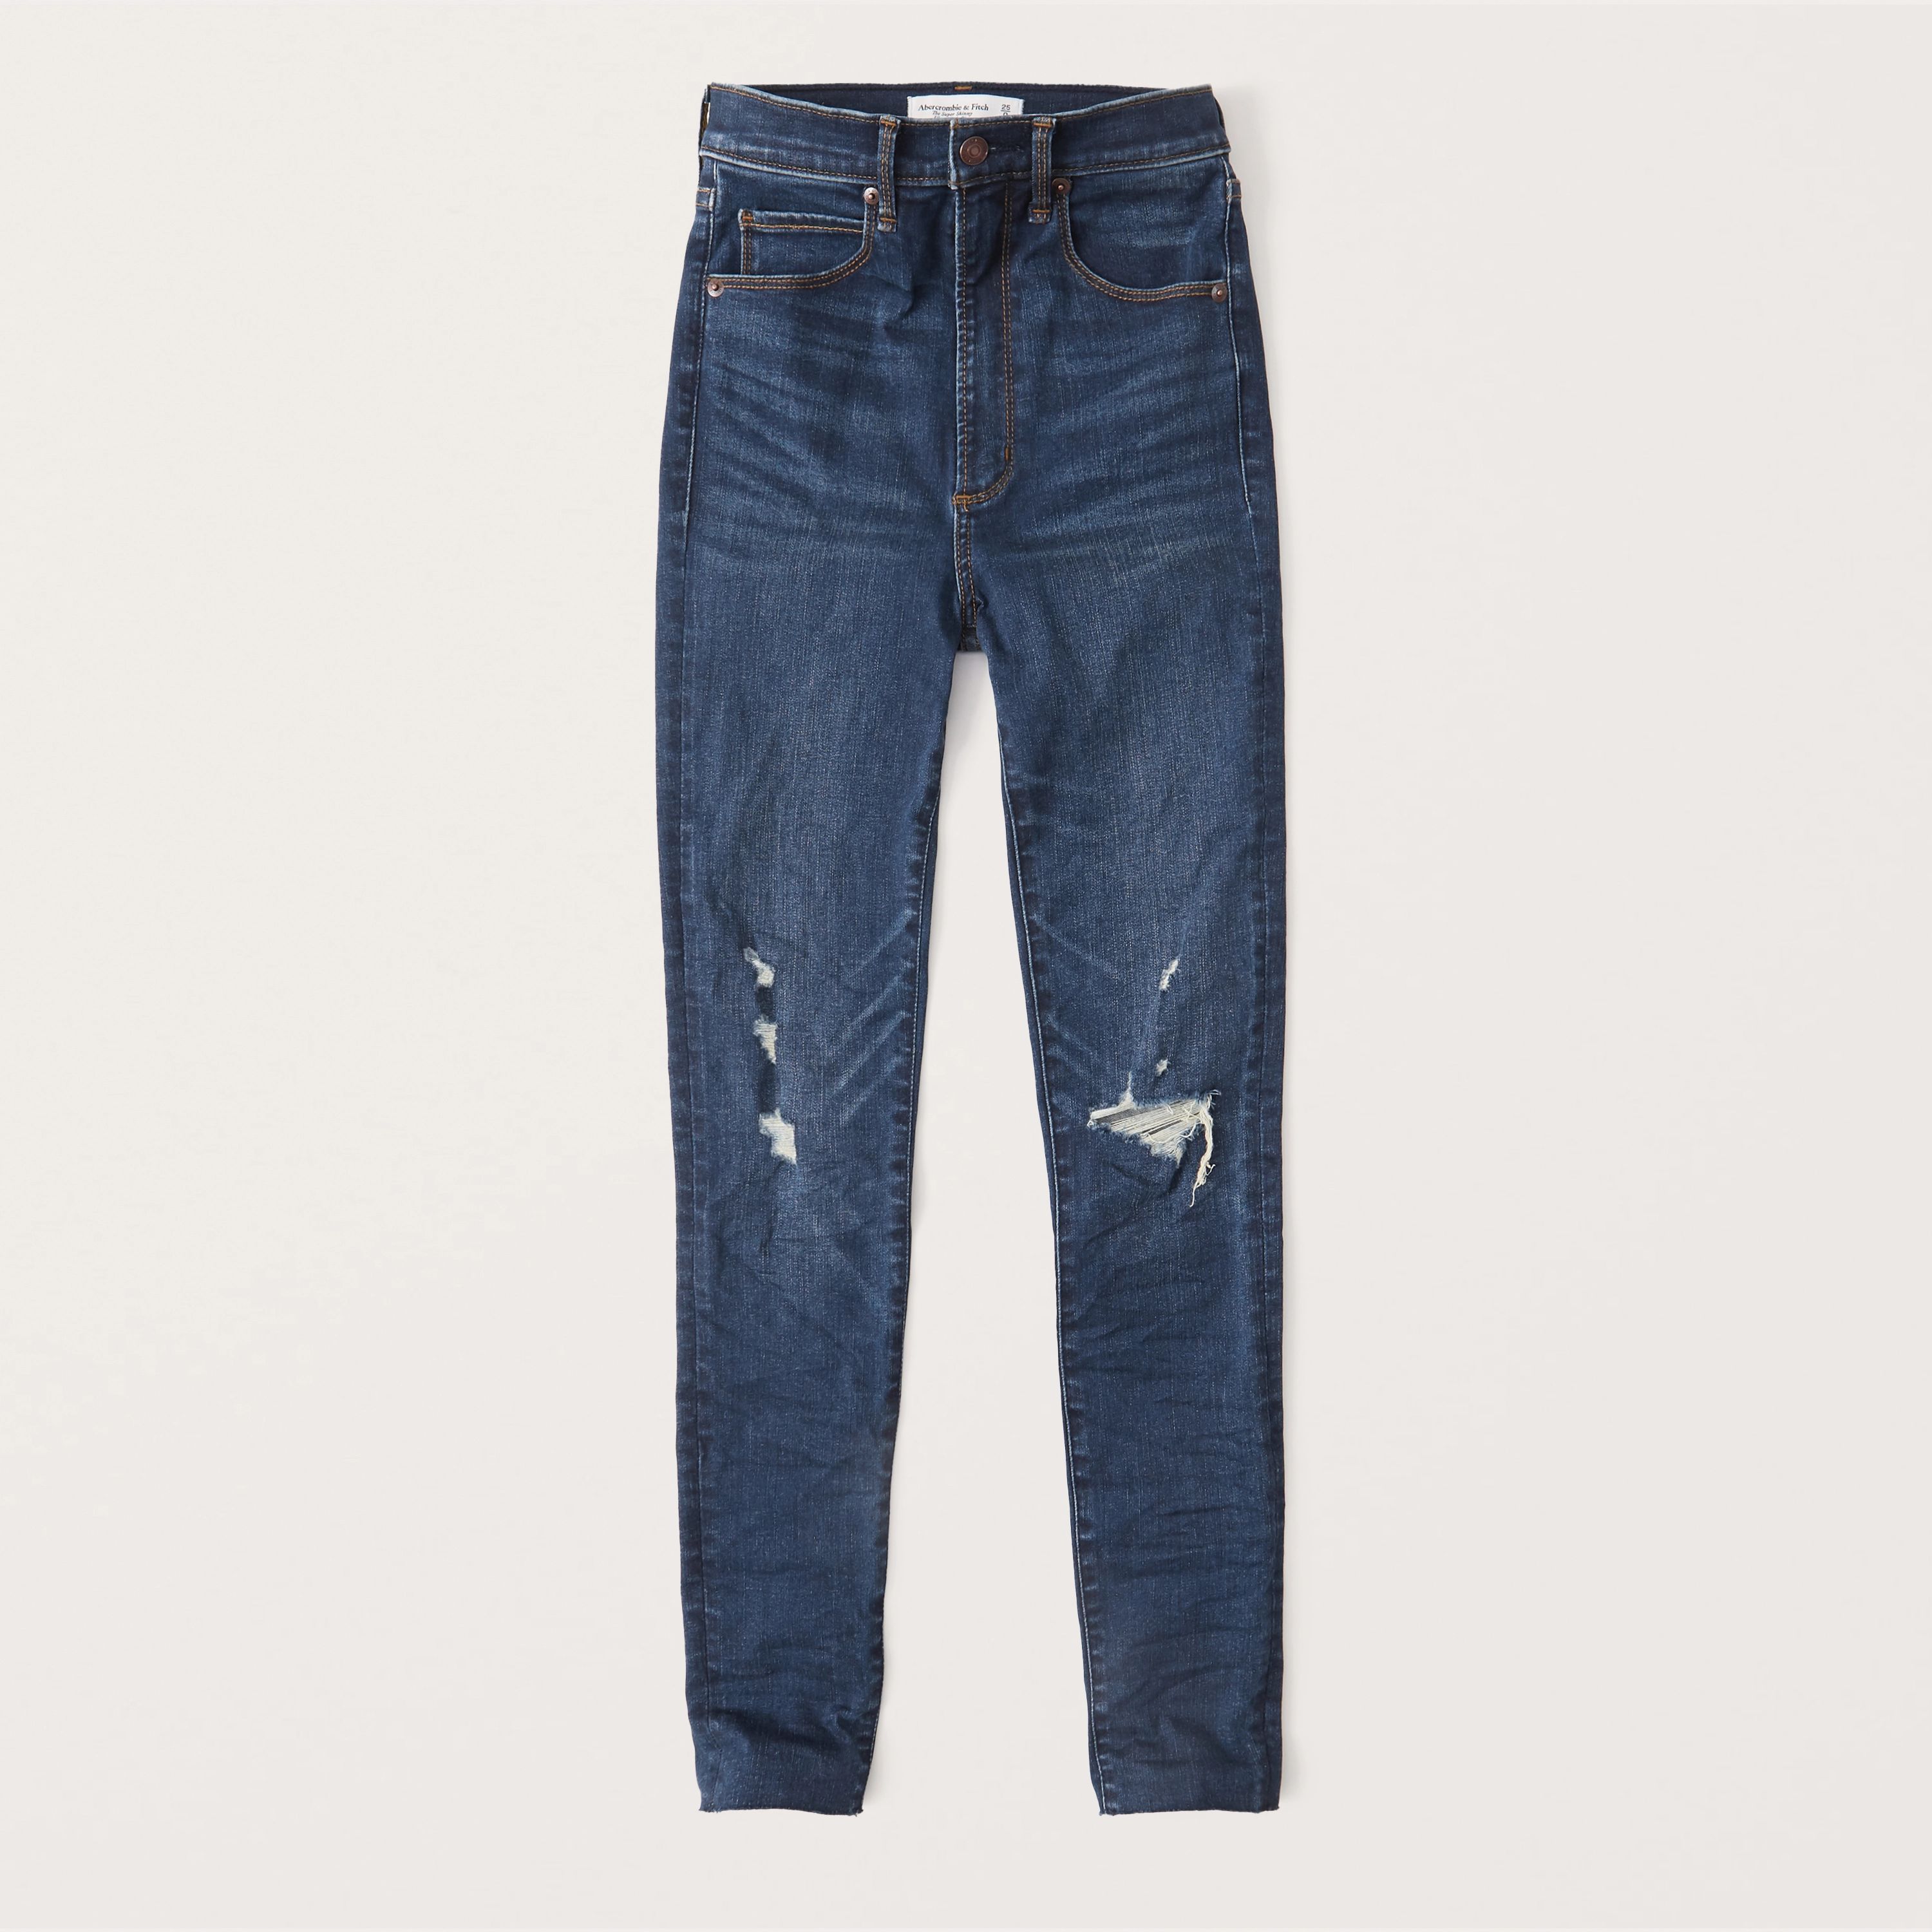 Women's Ultra High Rise Super Skinny Jeans | Women's Bottoms | Abercrombie.com | Abercrombie & Fitch (US)